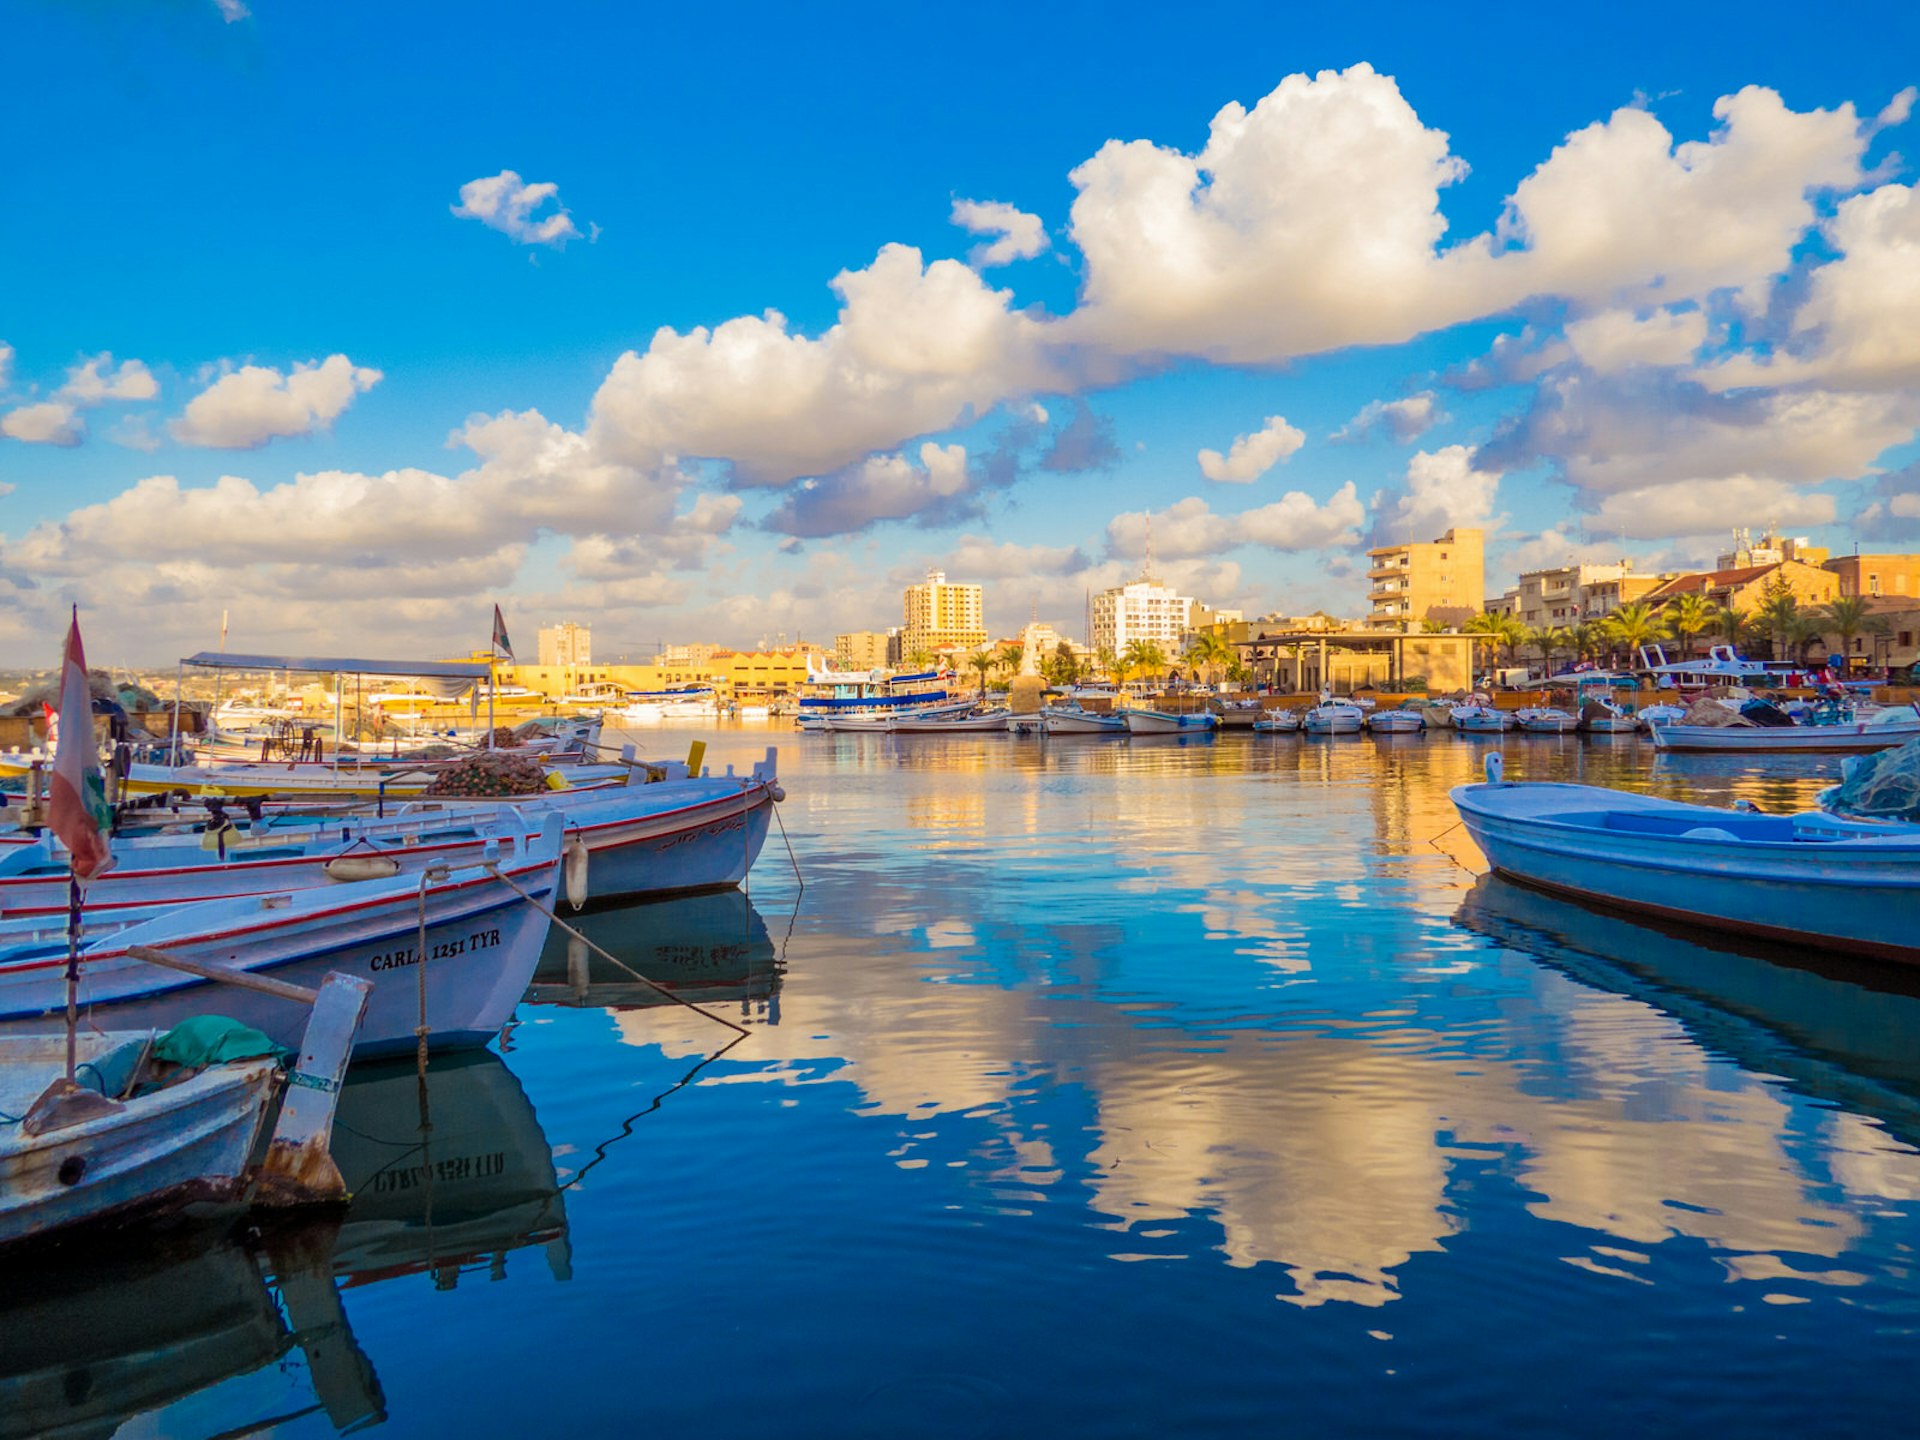 View of the port at Tyre, Lebanon, at sunset © Diego Fiore / Shutterstock